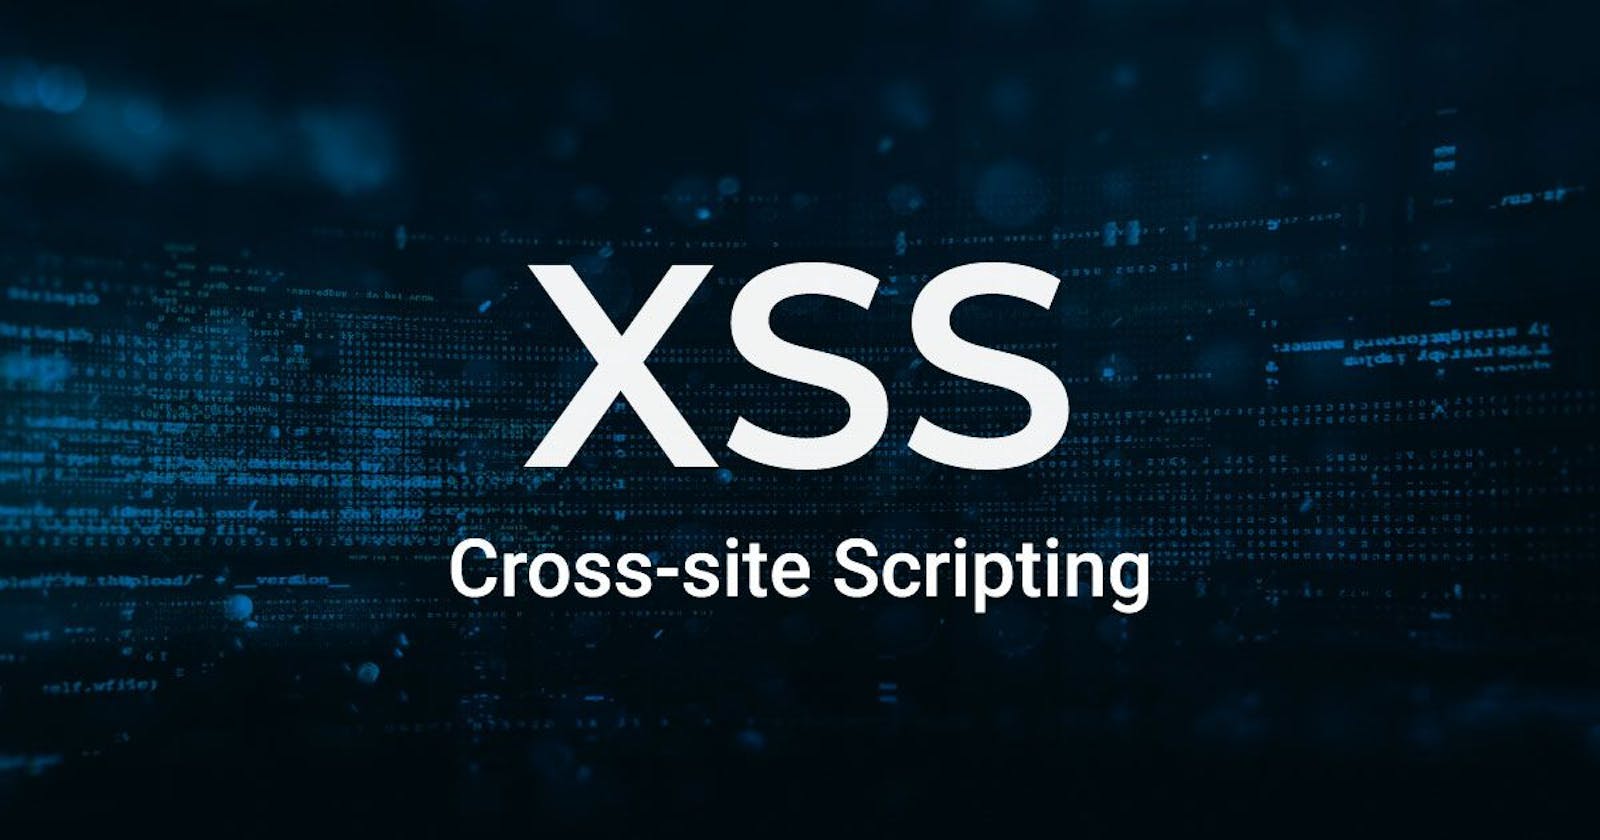 How To Prevent HPP and XSS Attacks In Nodejs